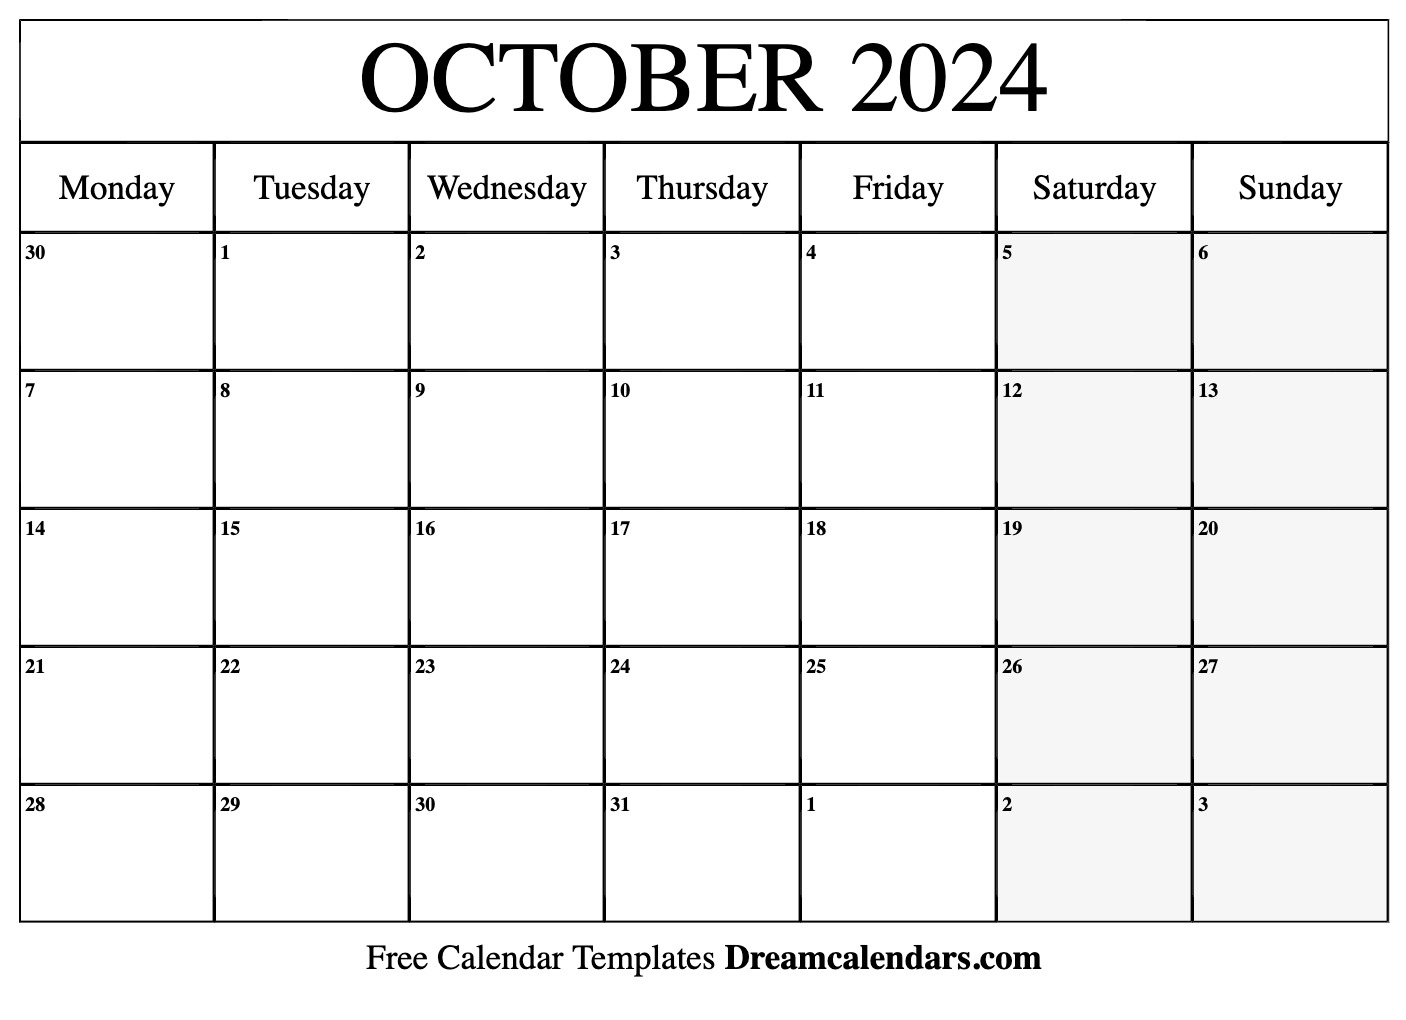 October 2024 Calendar | Free Blank Printable With Holidays for Free Printable October 2024 Calendar